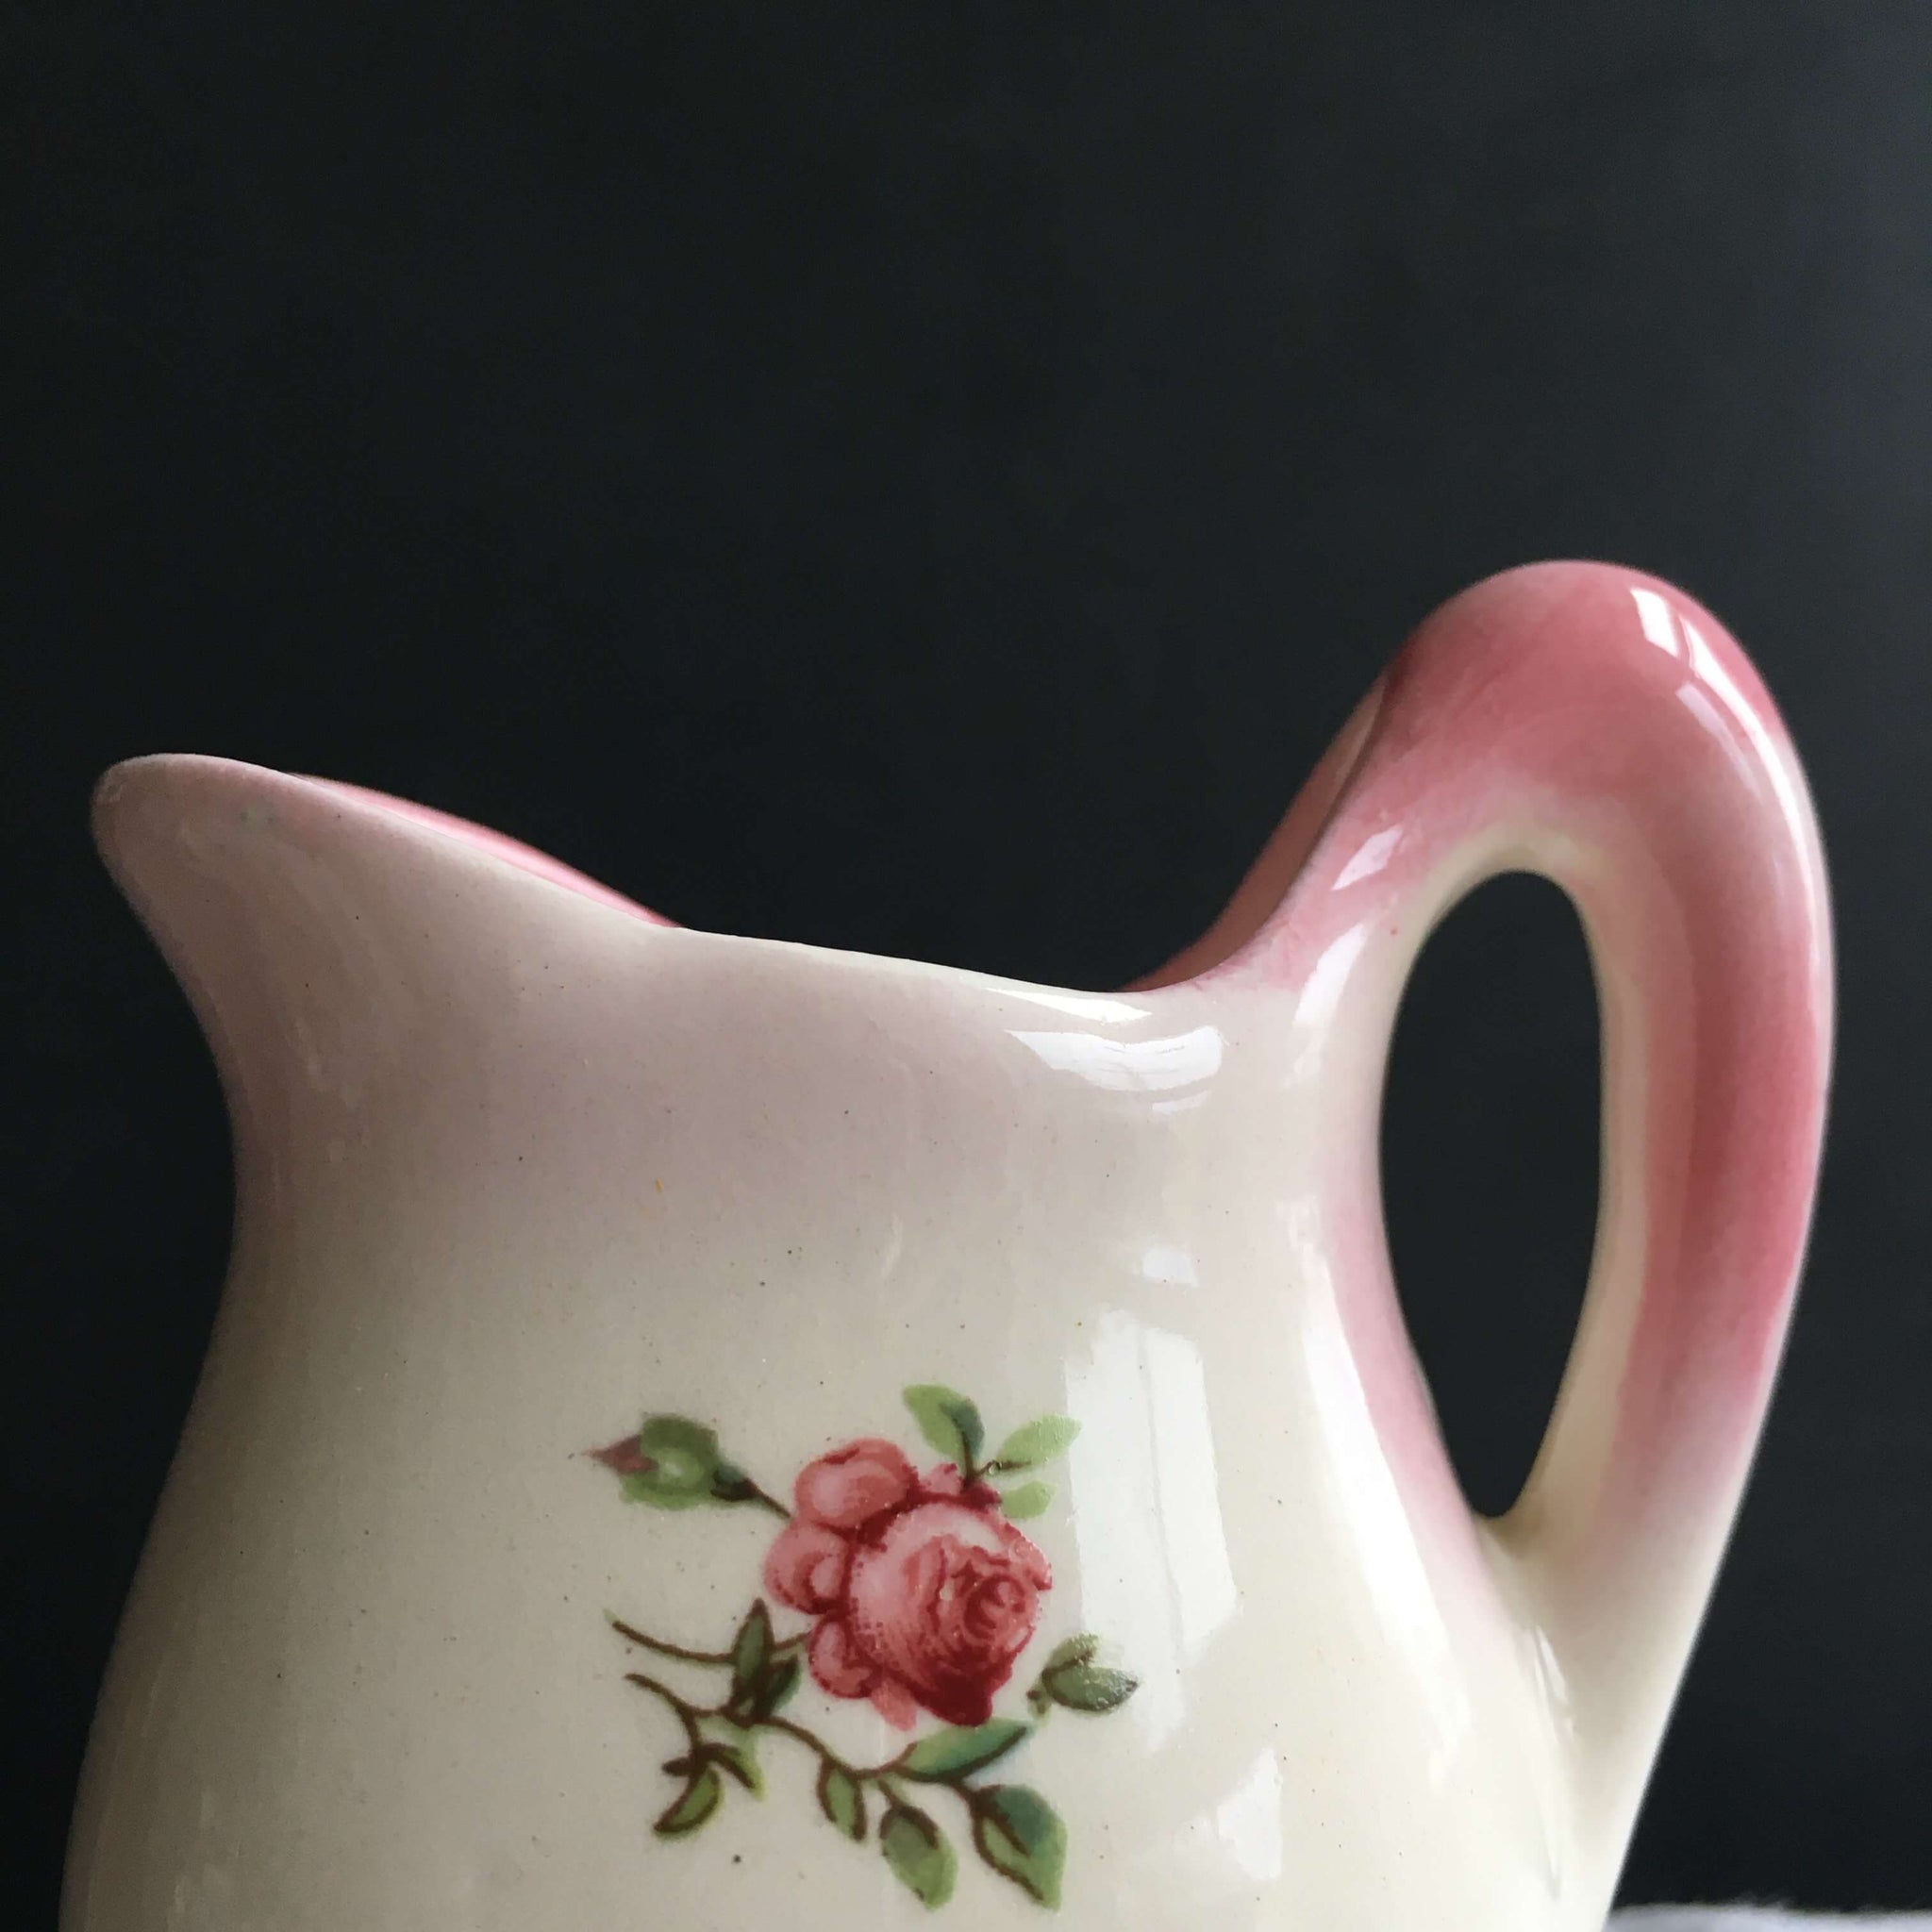 {RESERVED} Vintage Miniature Creamer for Individual Use - Pink Rose Floral {RESERVED for Monica}